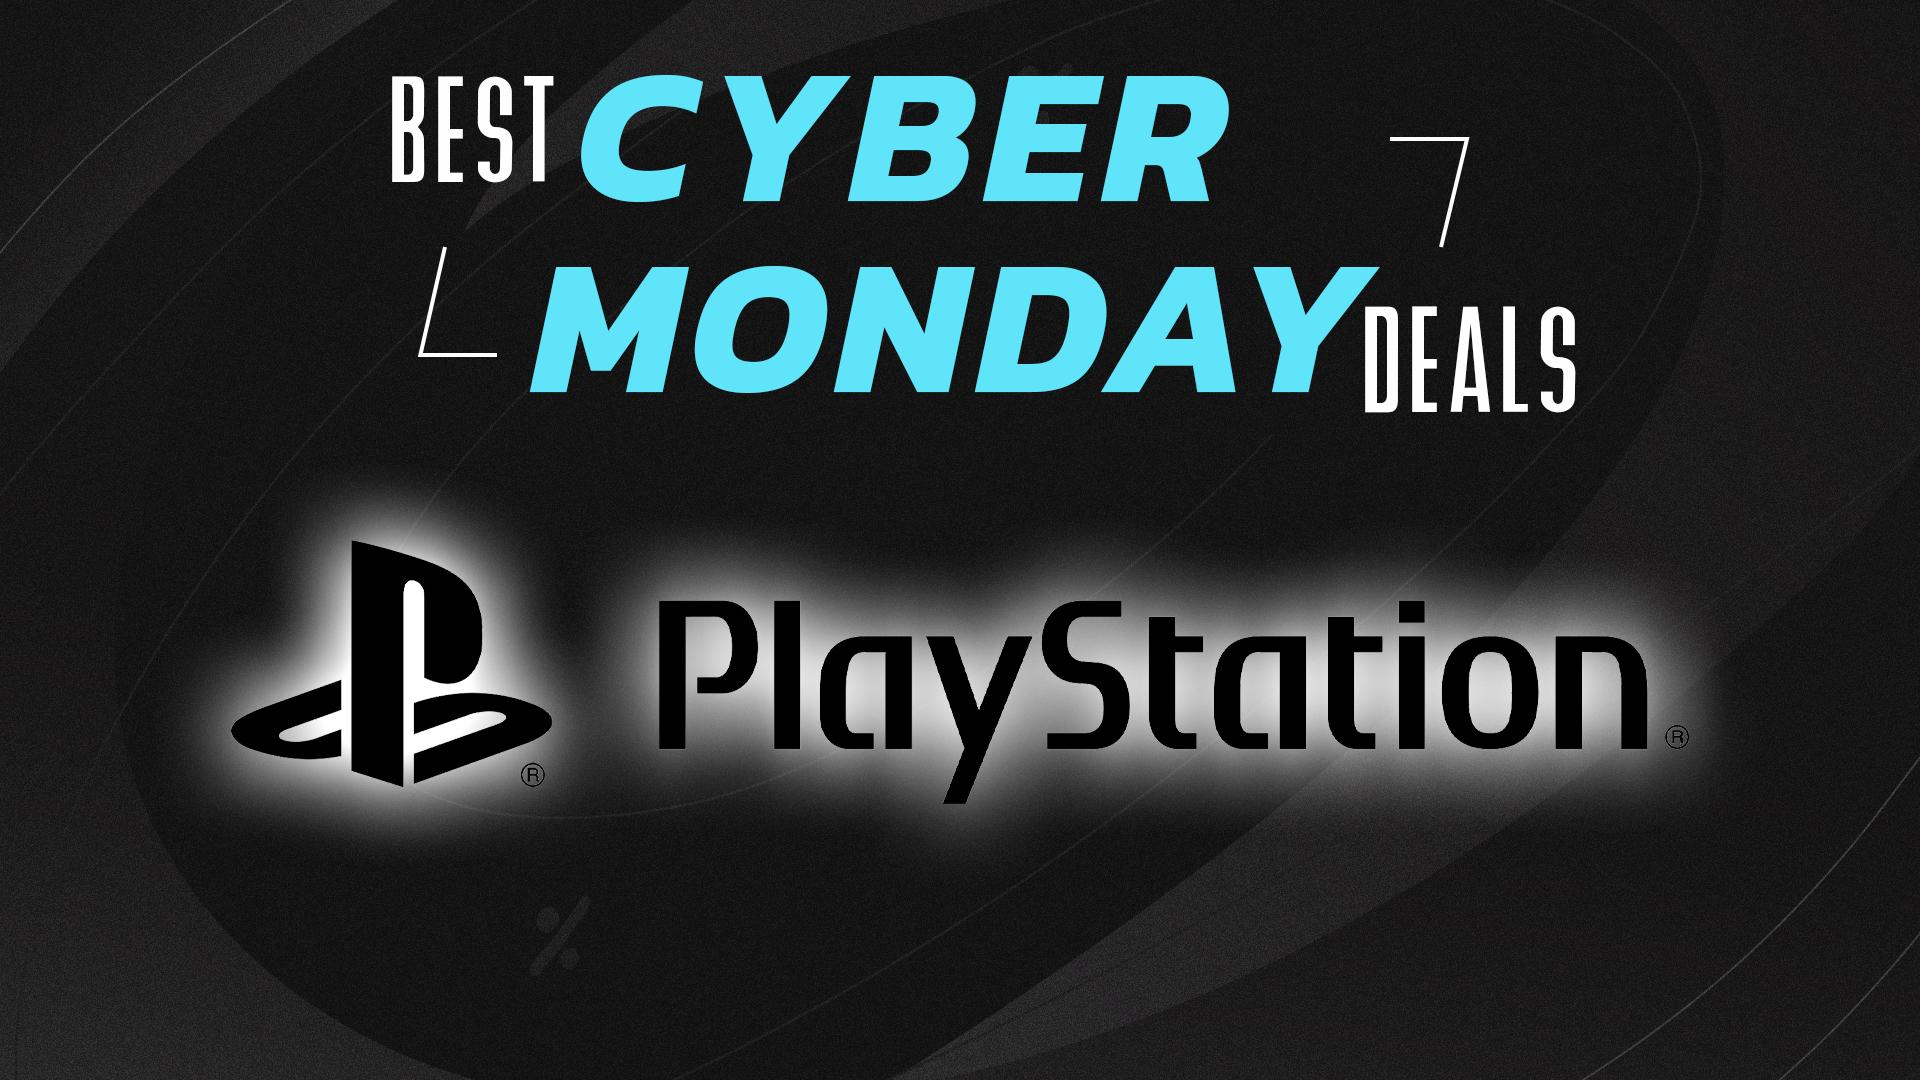 Top 10 PlayStation Store Deals You Cannot Miss for Black Friday